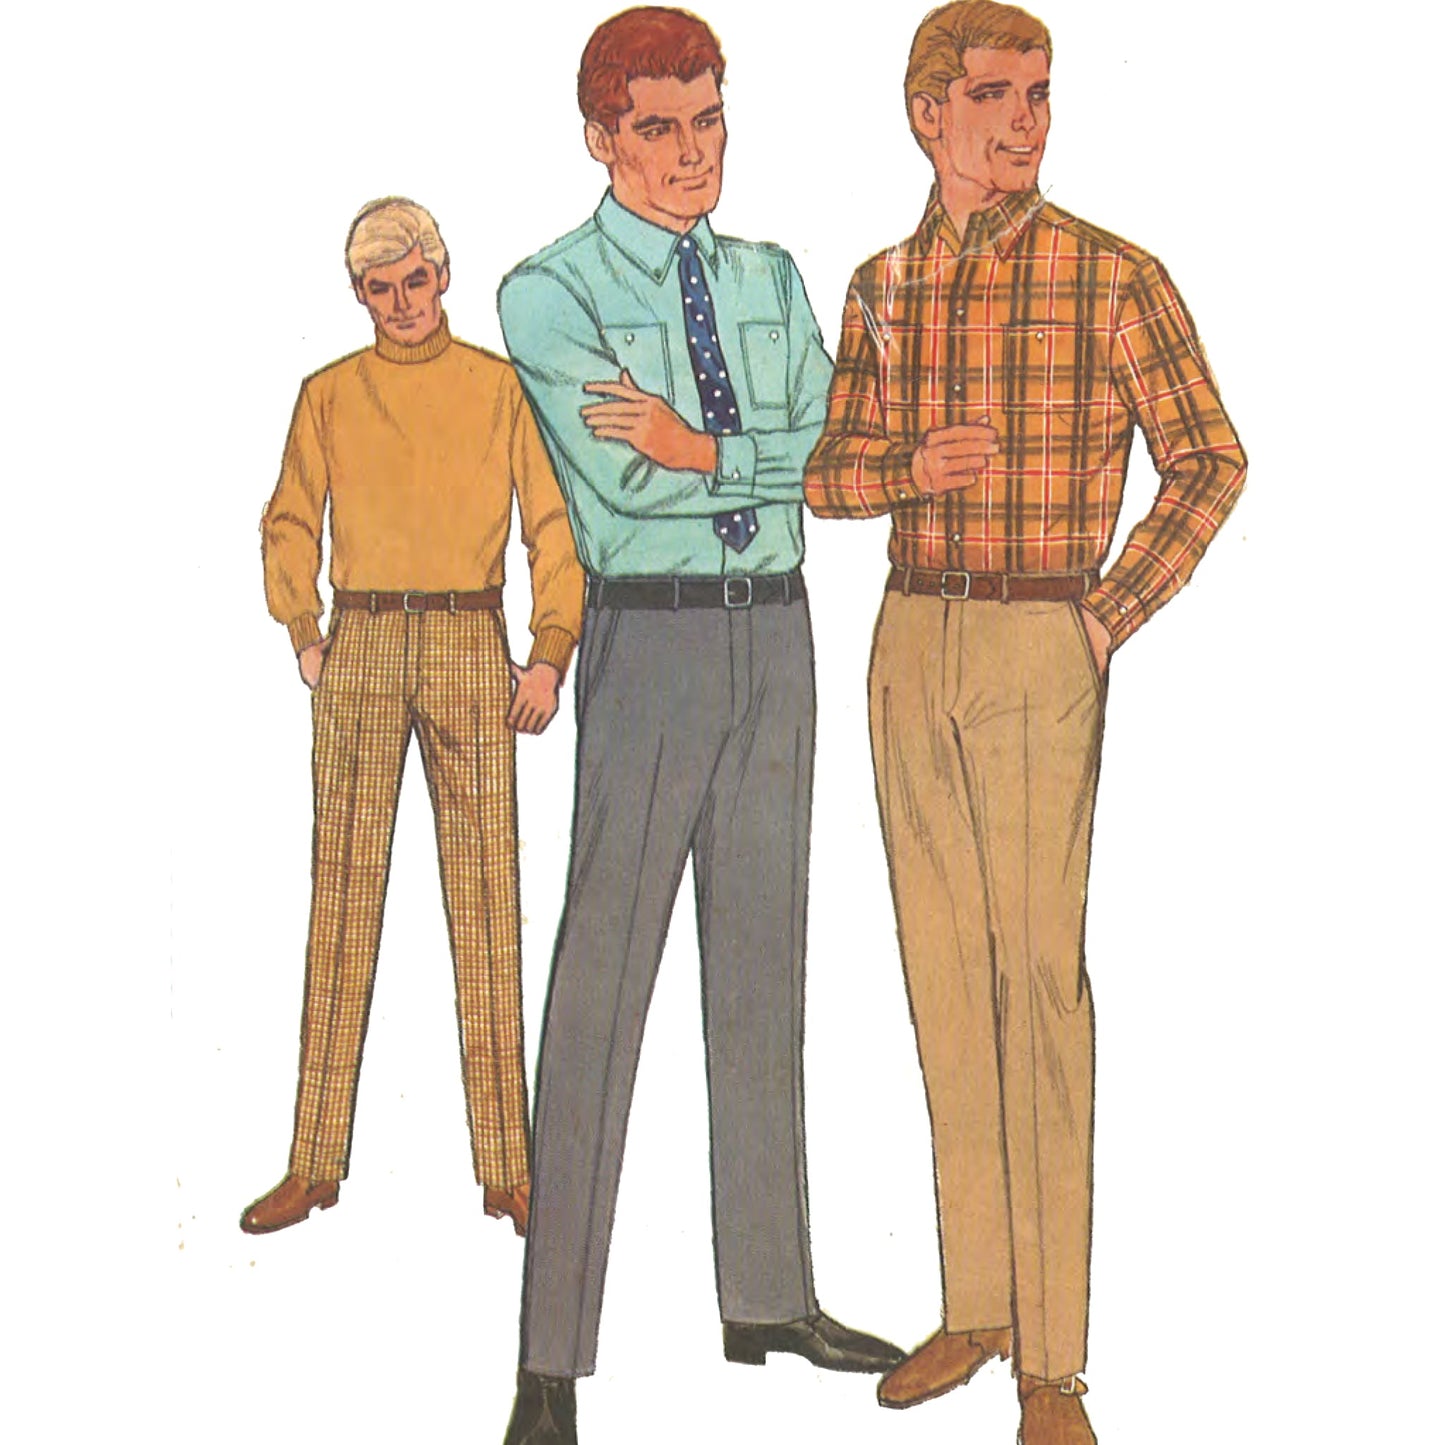 Men wearing shirts and trousers